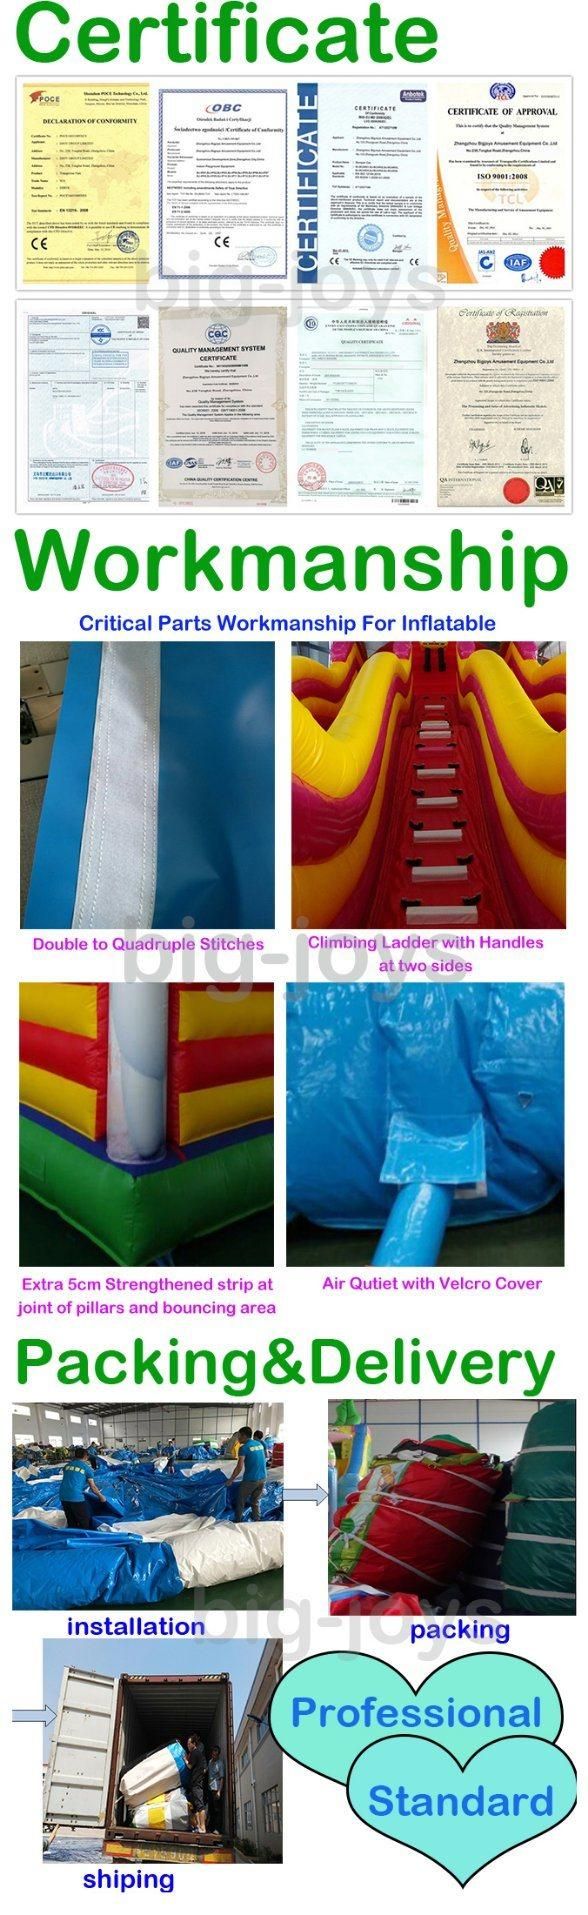 Inflatable bouncer jumping castle slide commercial bounce house with slide